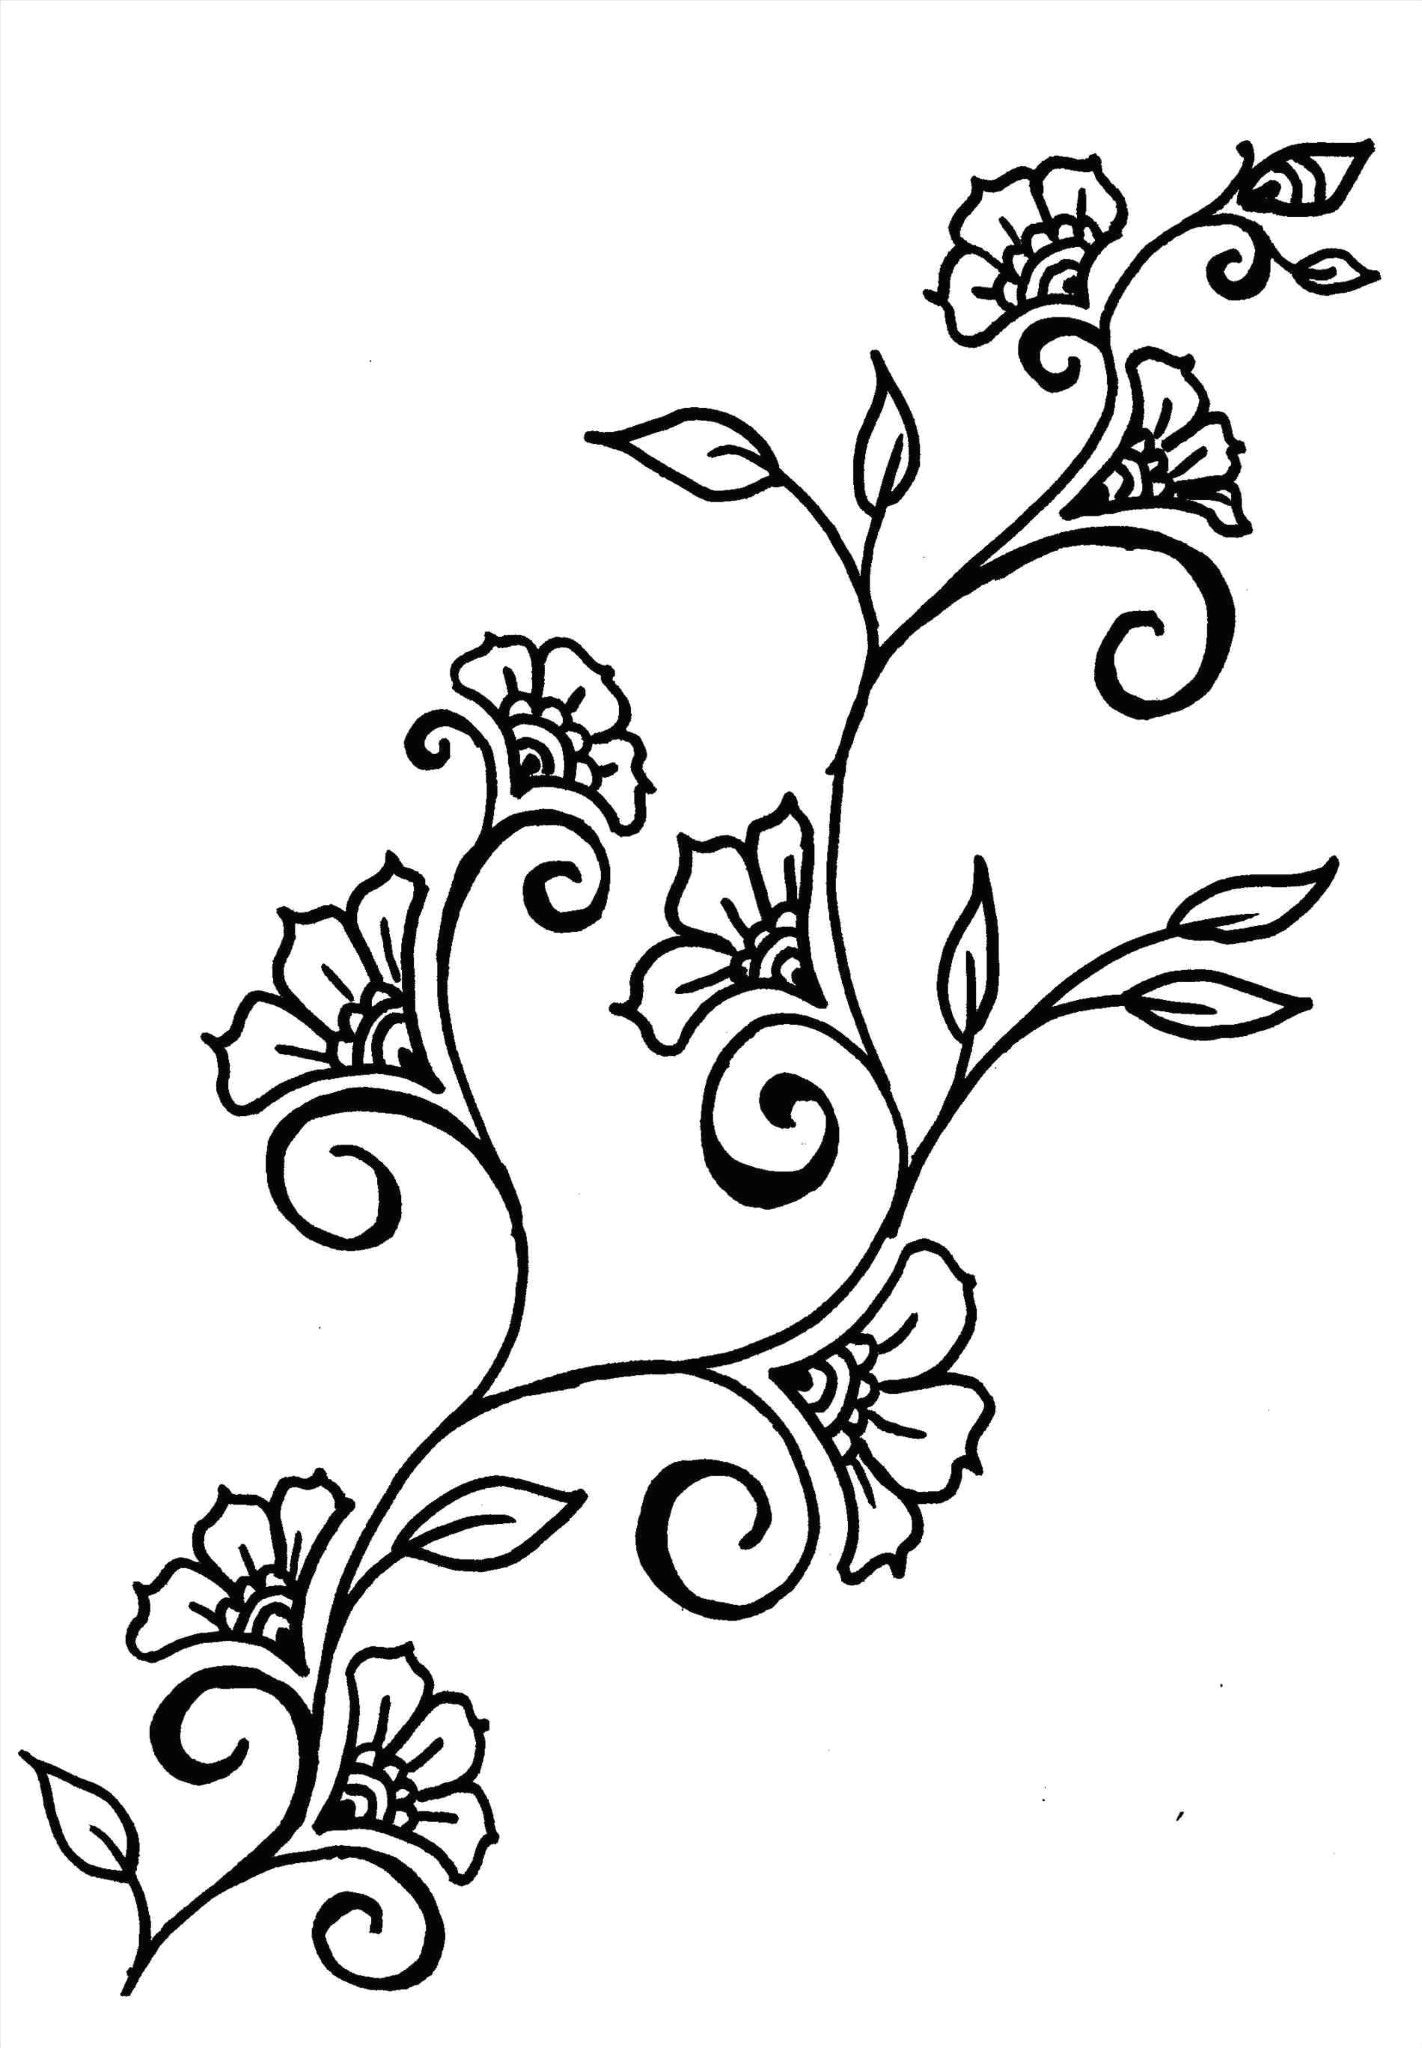 Drawings Of Flower Vines Pin by Cindy Nieport On Poland In 2018 Henna Drawings Tattoos